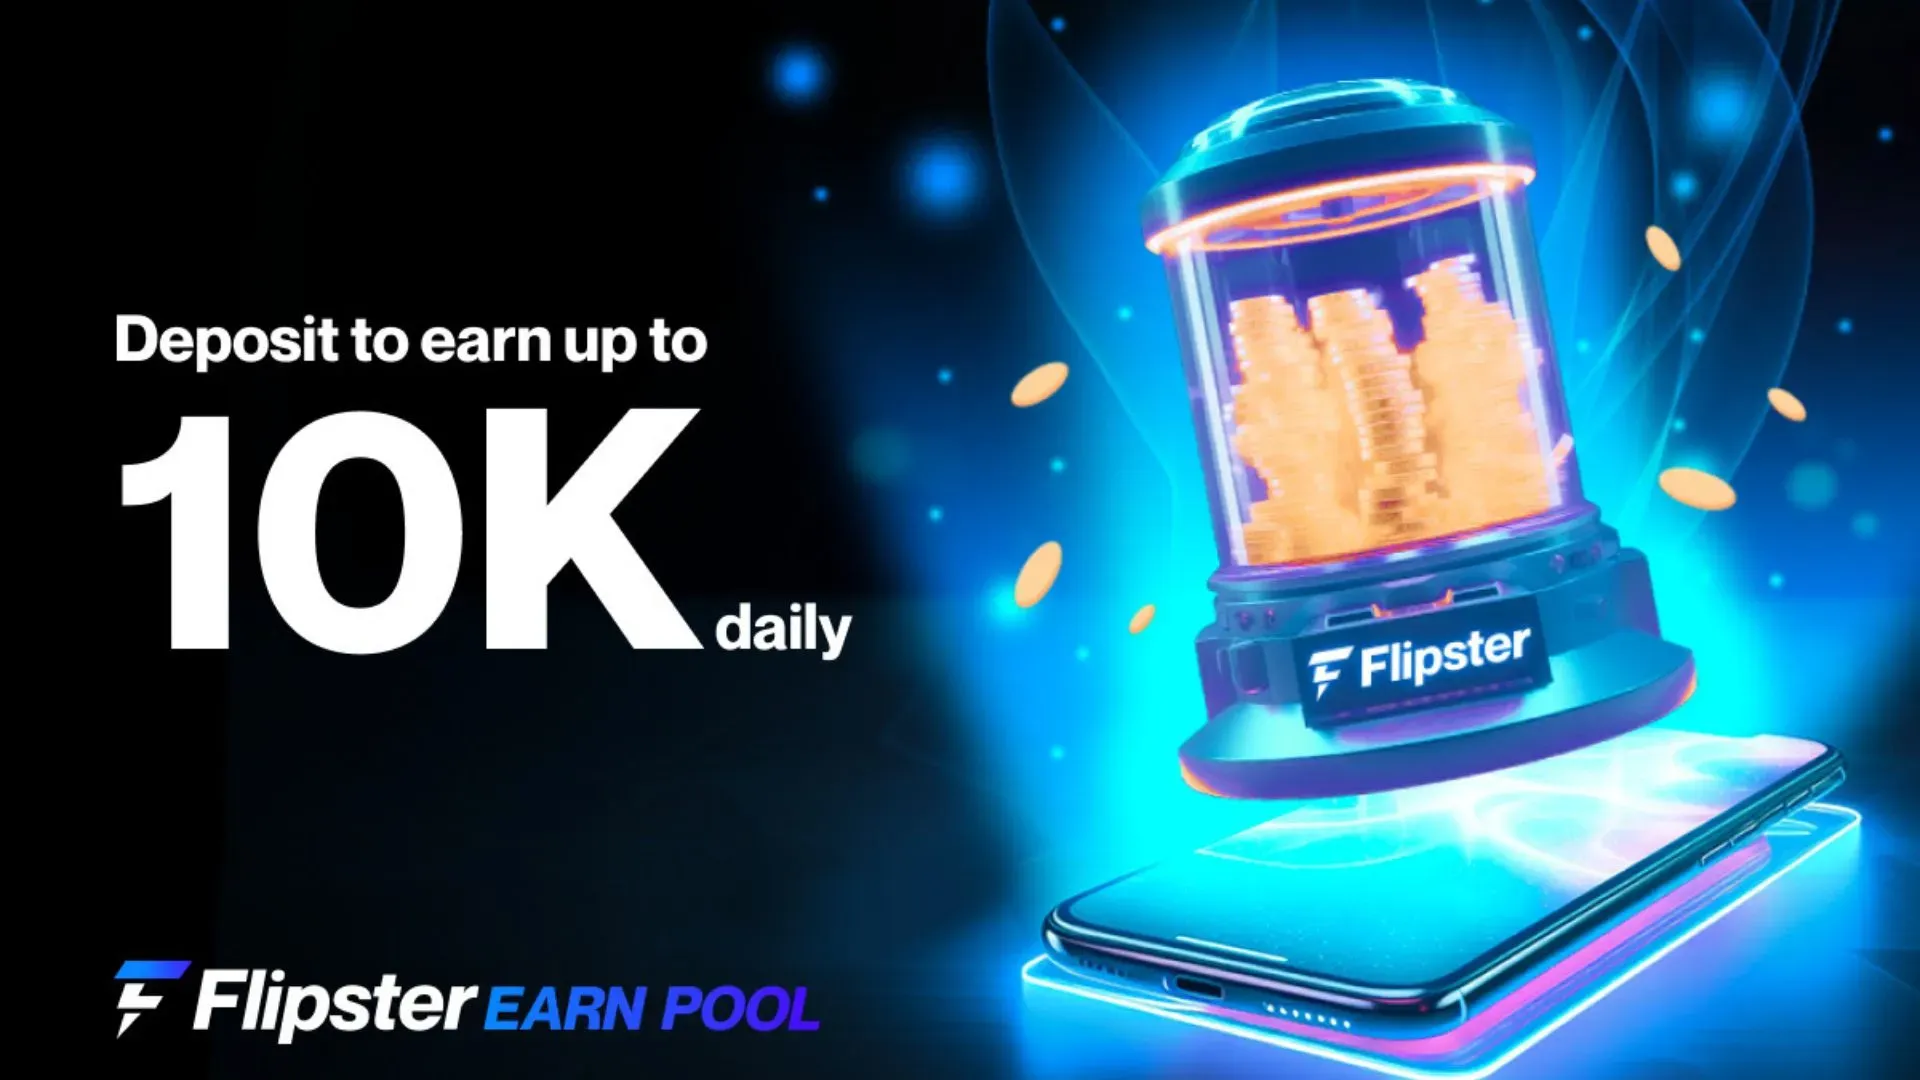 Flipster Debuts Earn Pool, Allowing Users To Earn Upto 10K USDT Daily